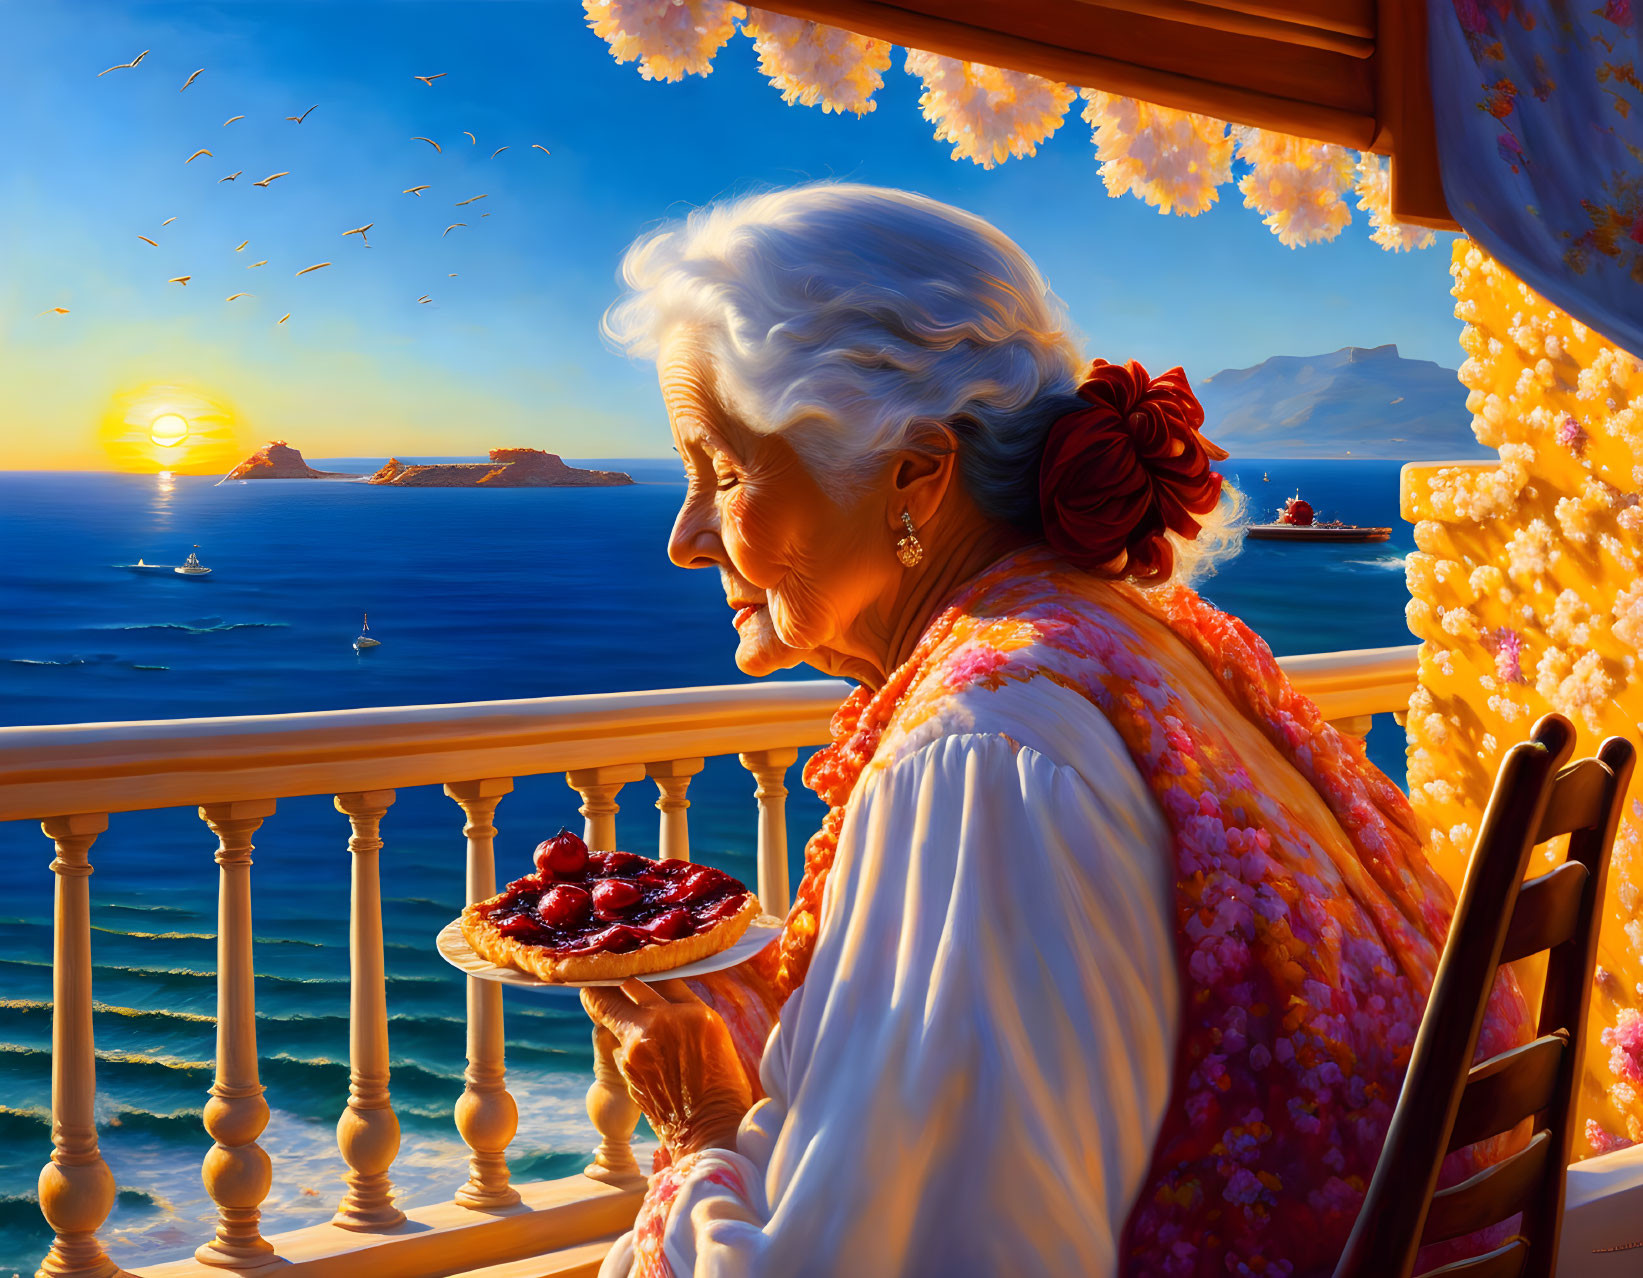 Elderly lady with white hair and shawl admires sunset over ocean with dish of red fruits